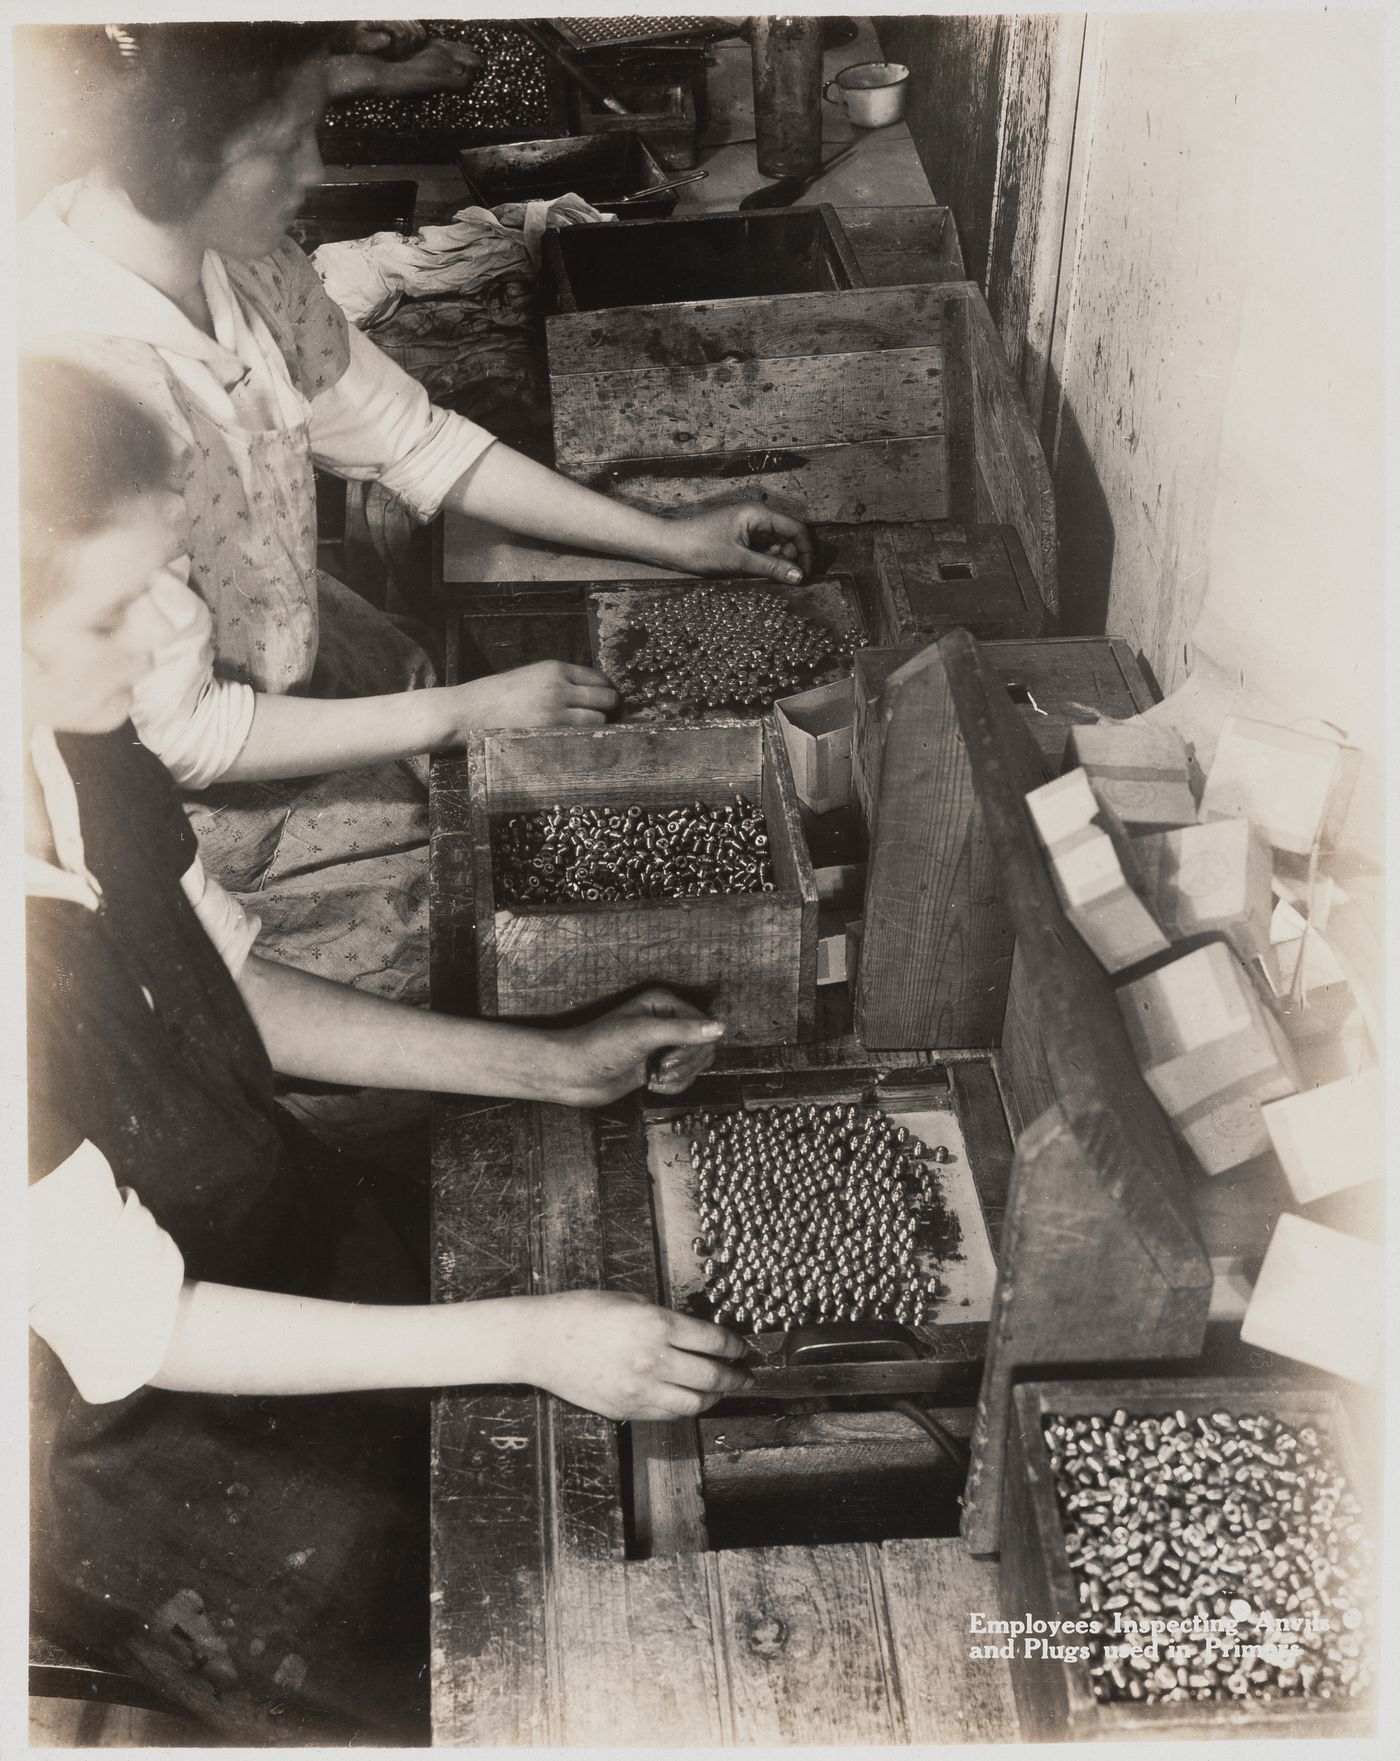 Interior view of workers inspecting anvils and plugs used in primers at the Energite Explosives Plant No. 3, the Shell Loading Plant, Renfrew, Ontario, Canada